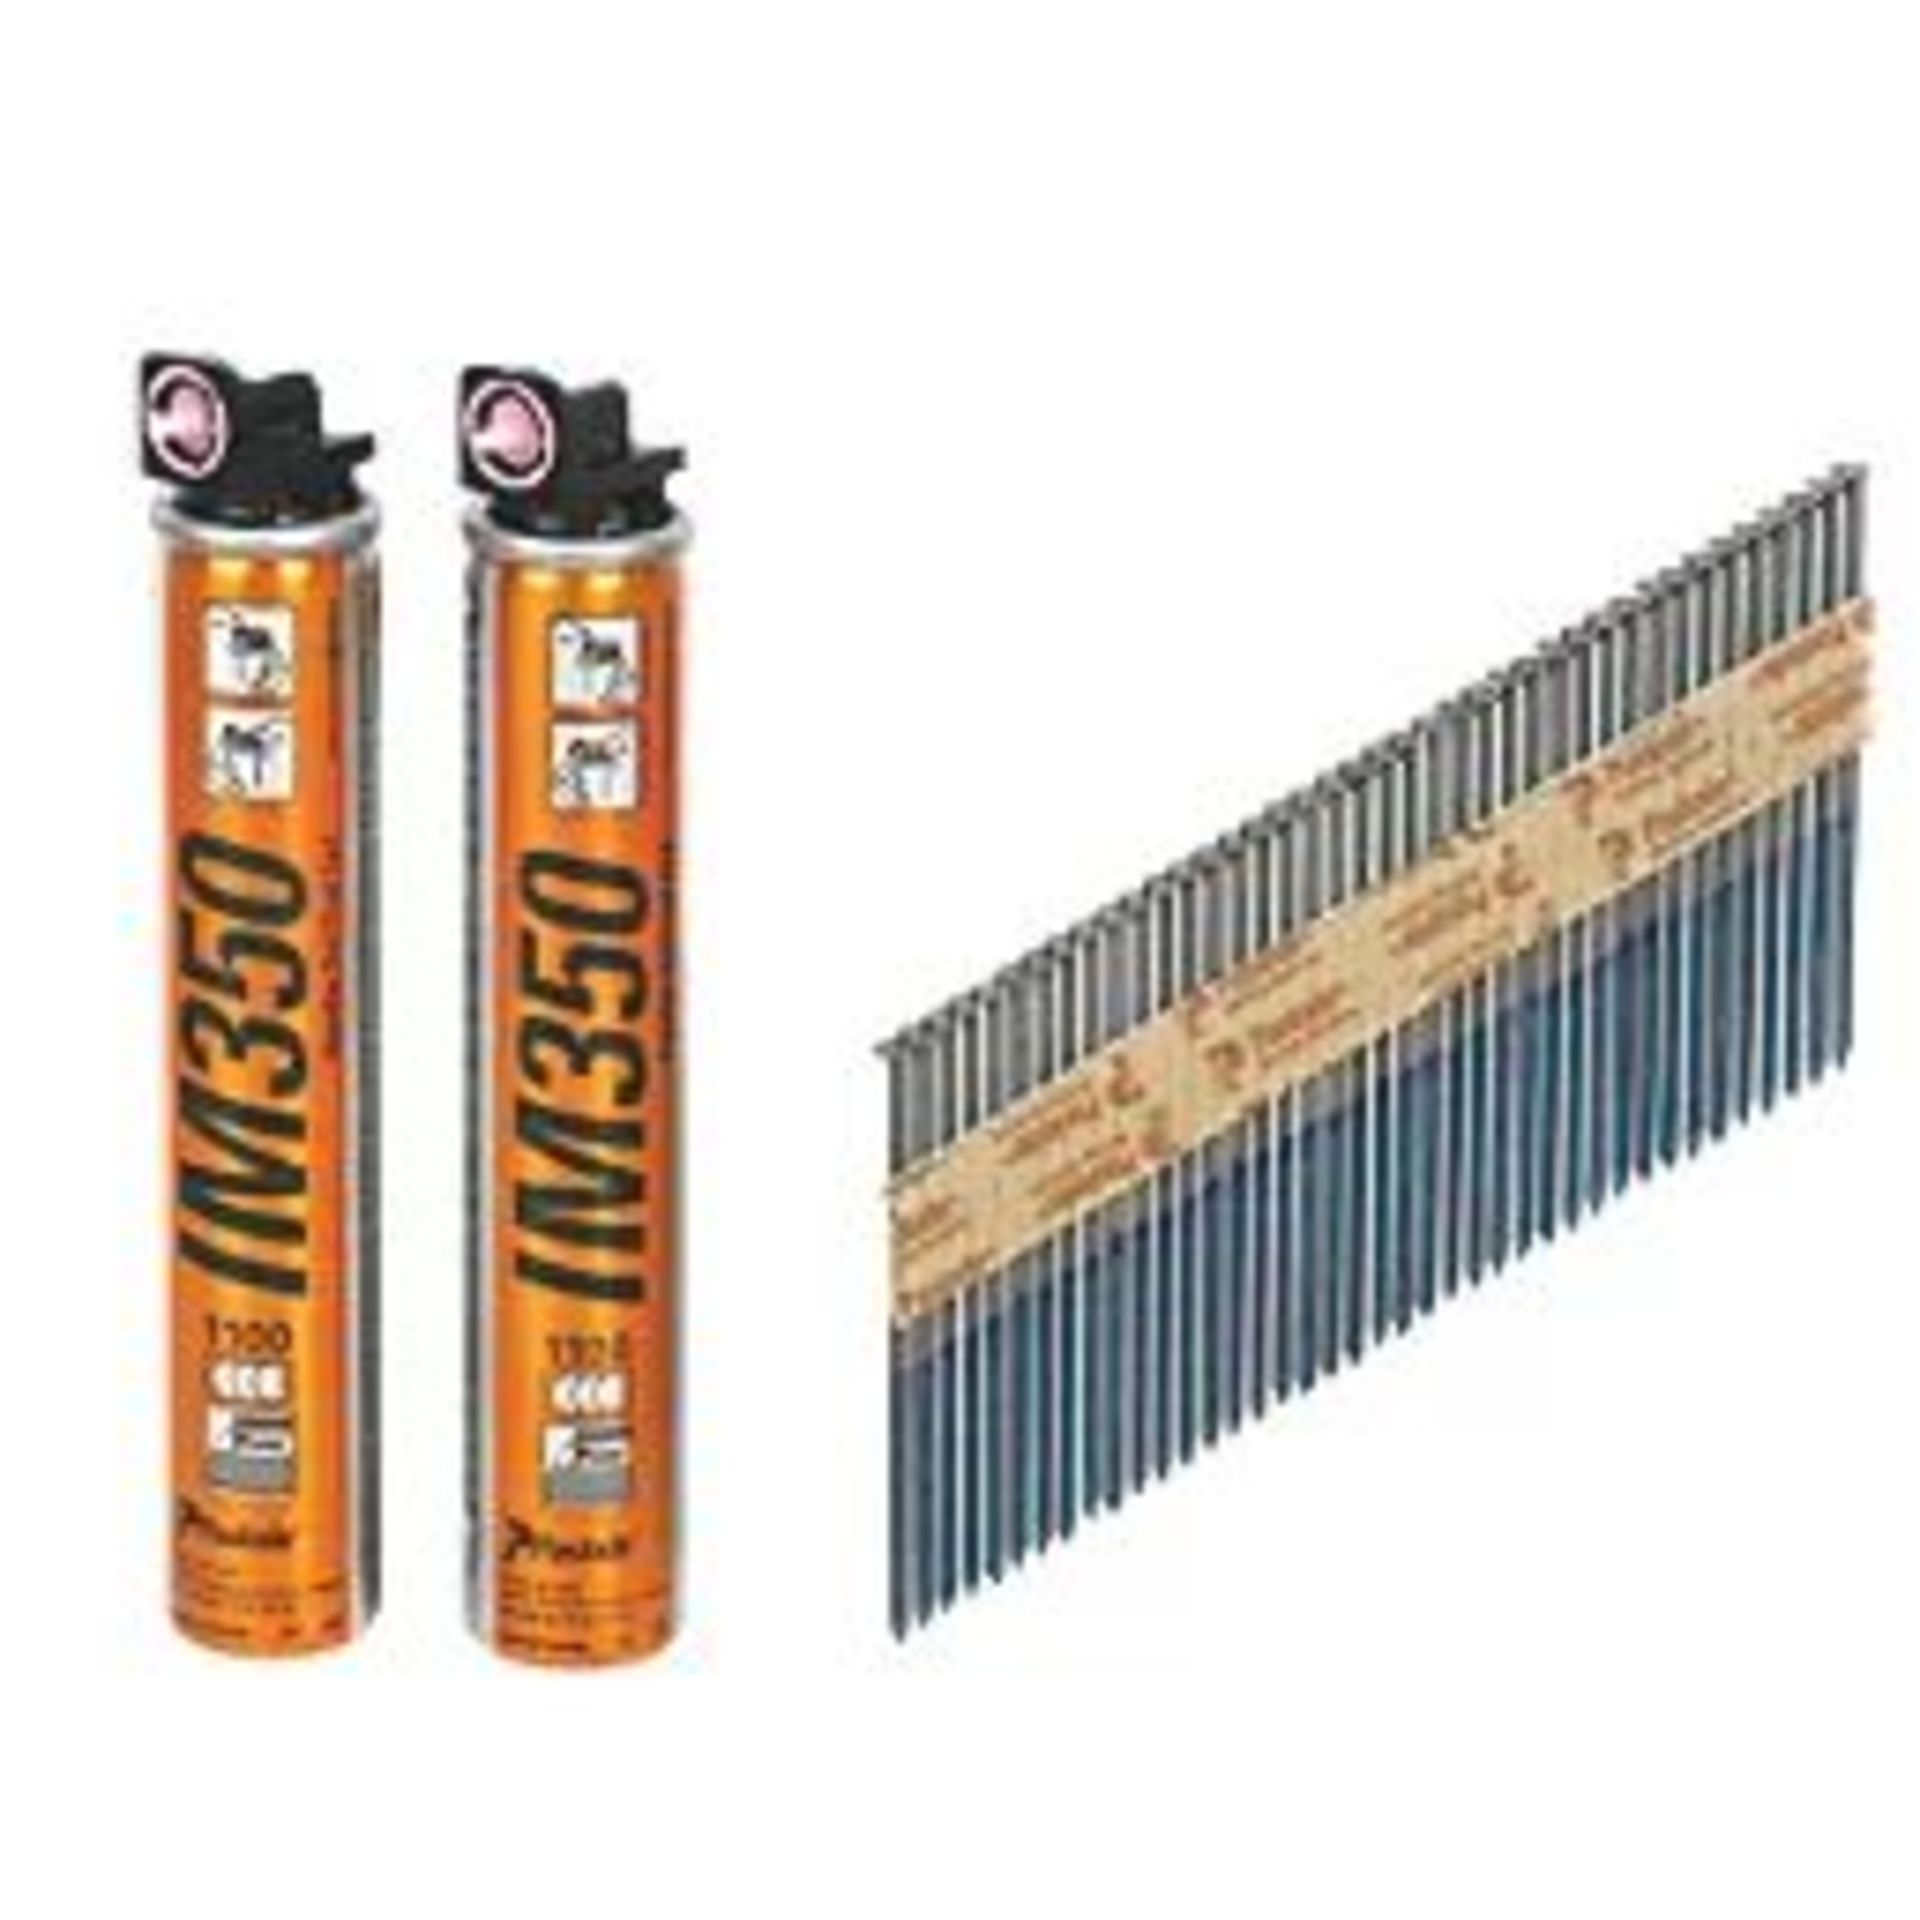 2 x PASLODE BRIGHT IM350 COLLATED NAILS 3.1MM X 90MM 2200 PACK. - ER46. RRP £89.99 each.